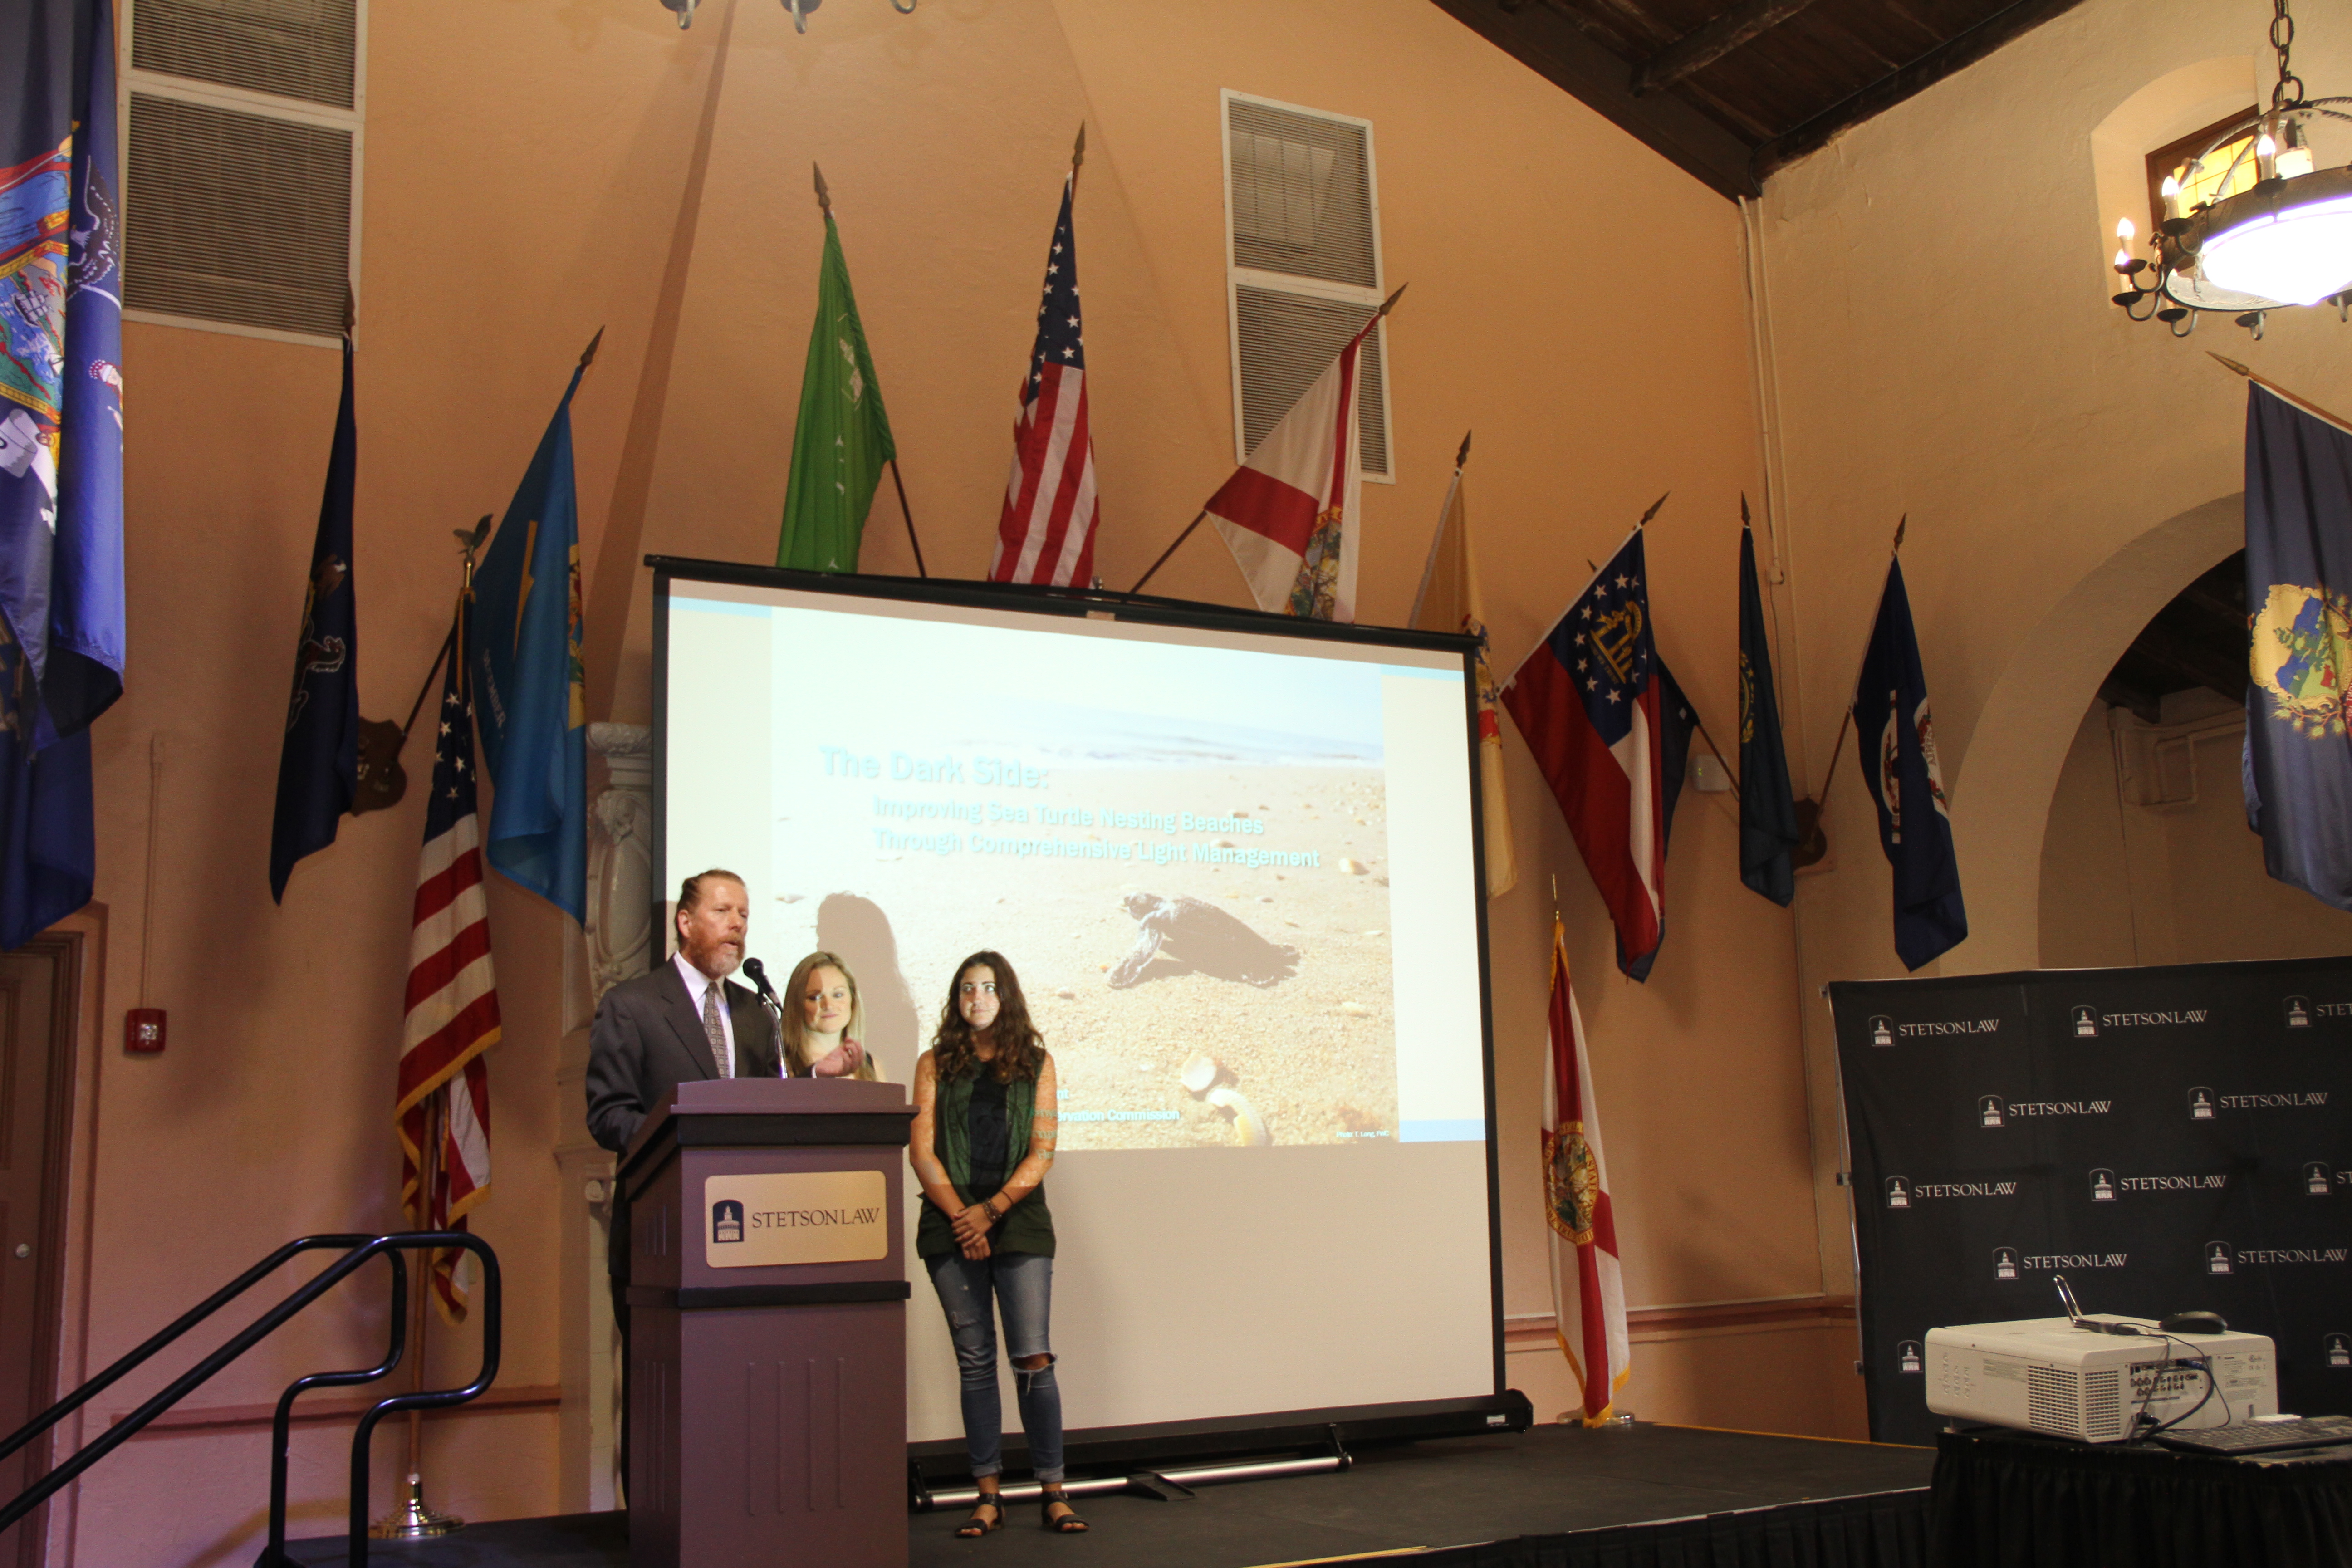 Professor Lance Long introduced the Zero Waste concept at the Foreman Biodiversity Lecture. Photo by Merve Ozcan.